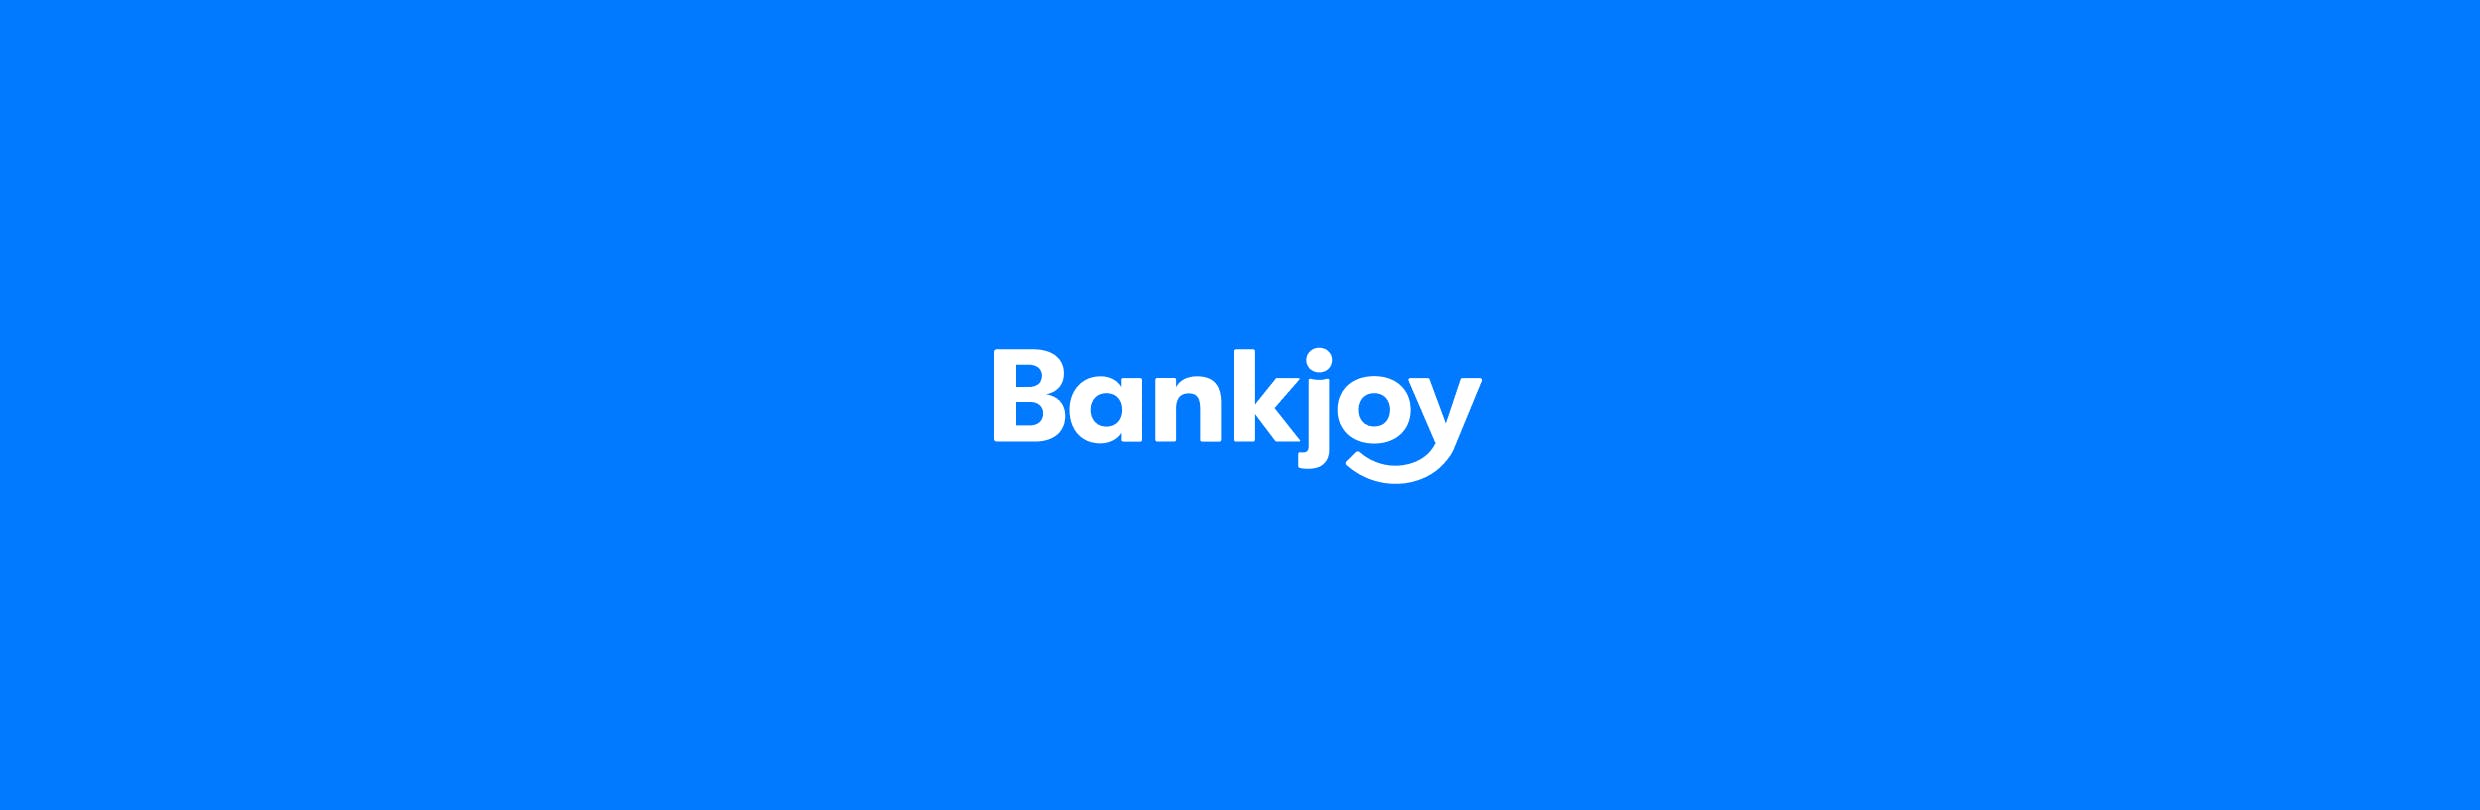 Corelation Conference, AI, and Online Account Opening | Bankjoy